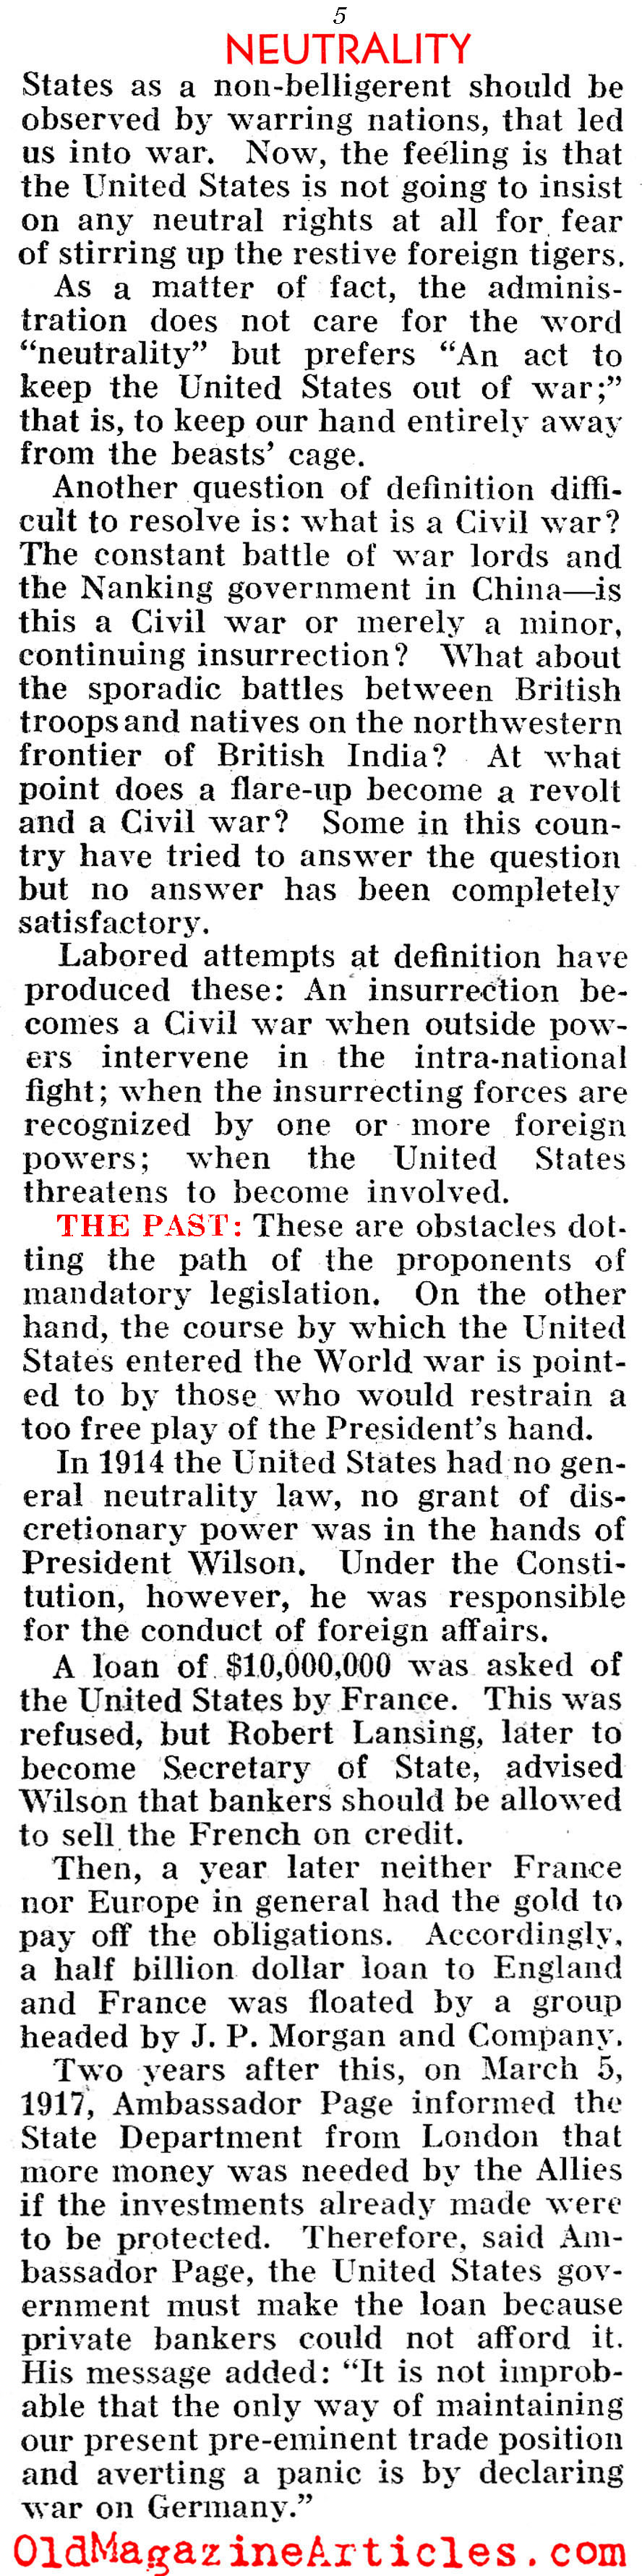 Can The U.S. Stay Out of The War? (Pathfinder Magazine, 1937)